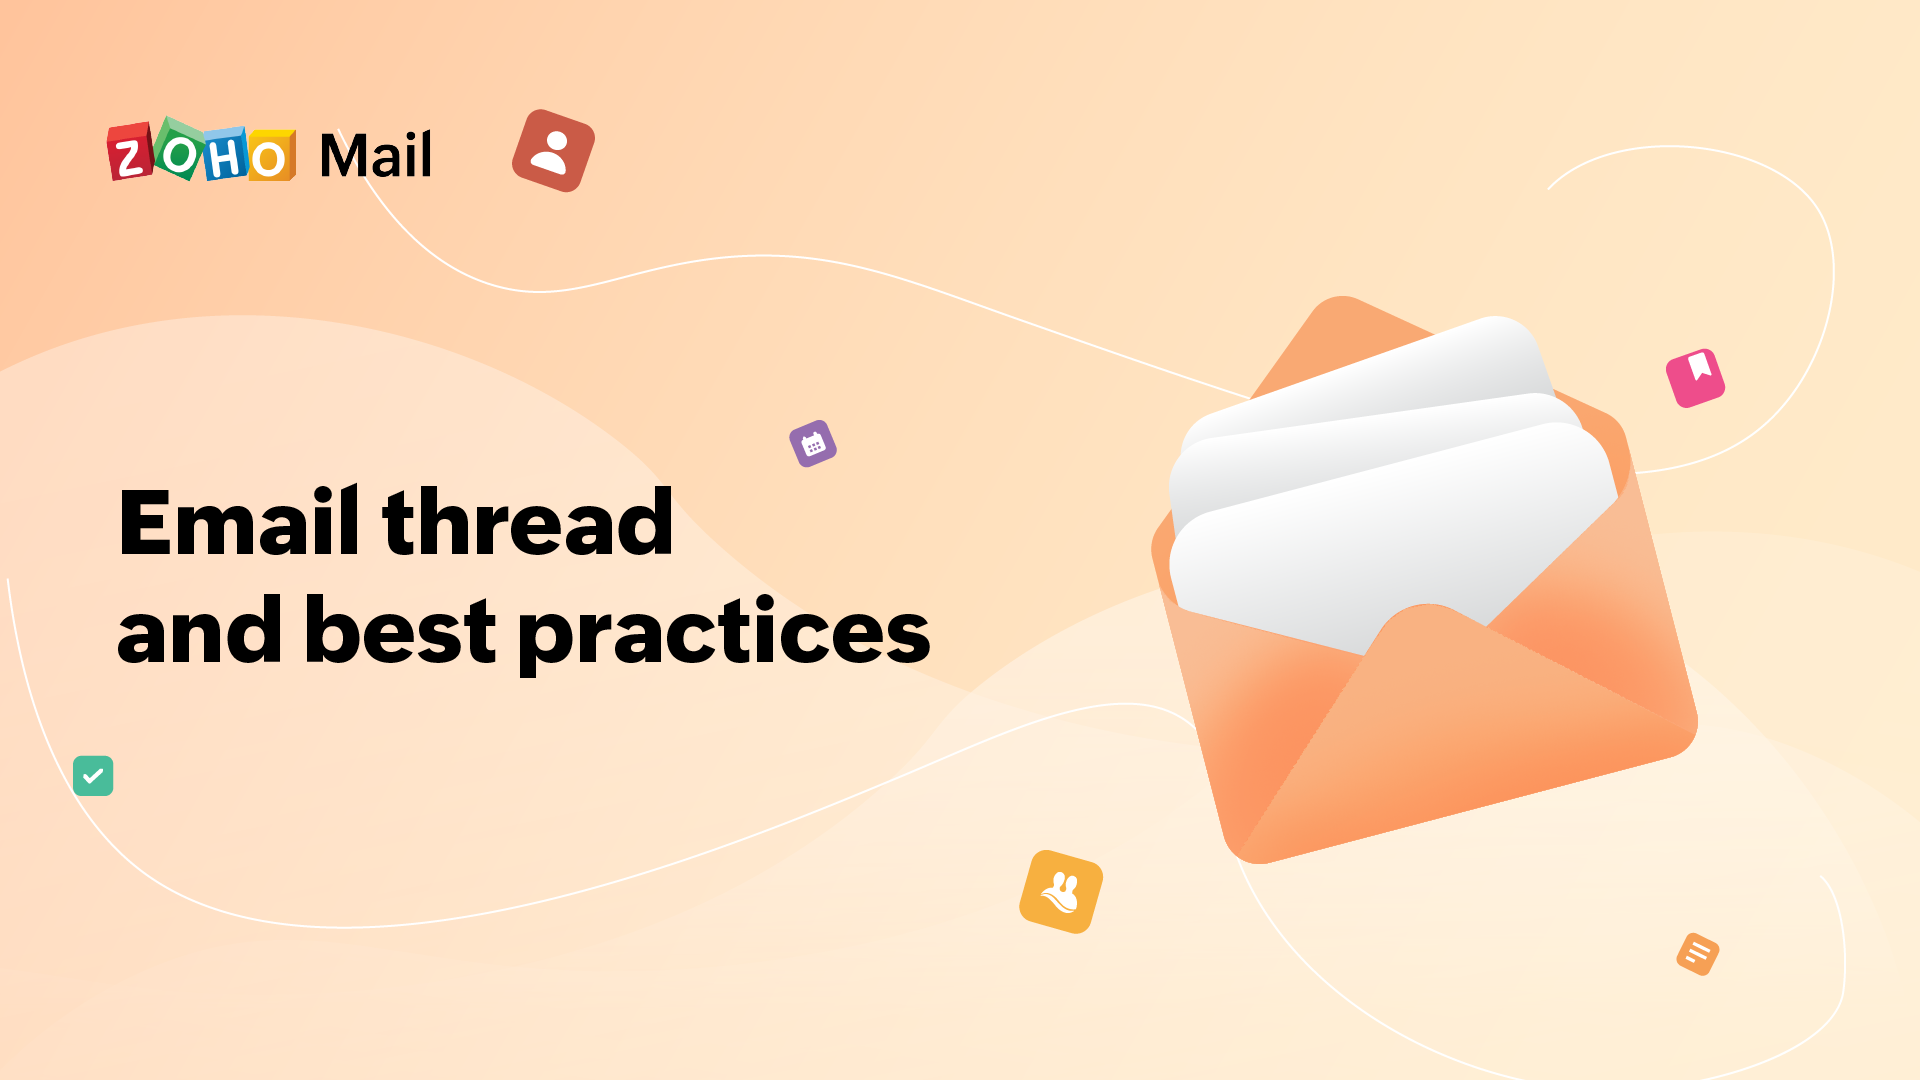 Email thread and best practices